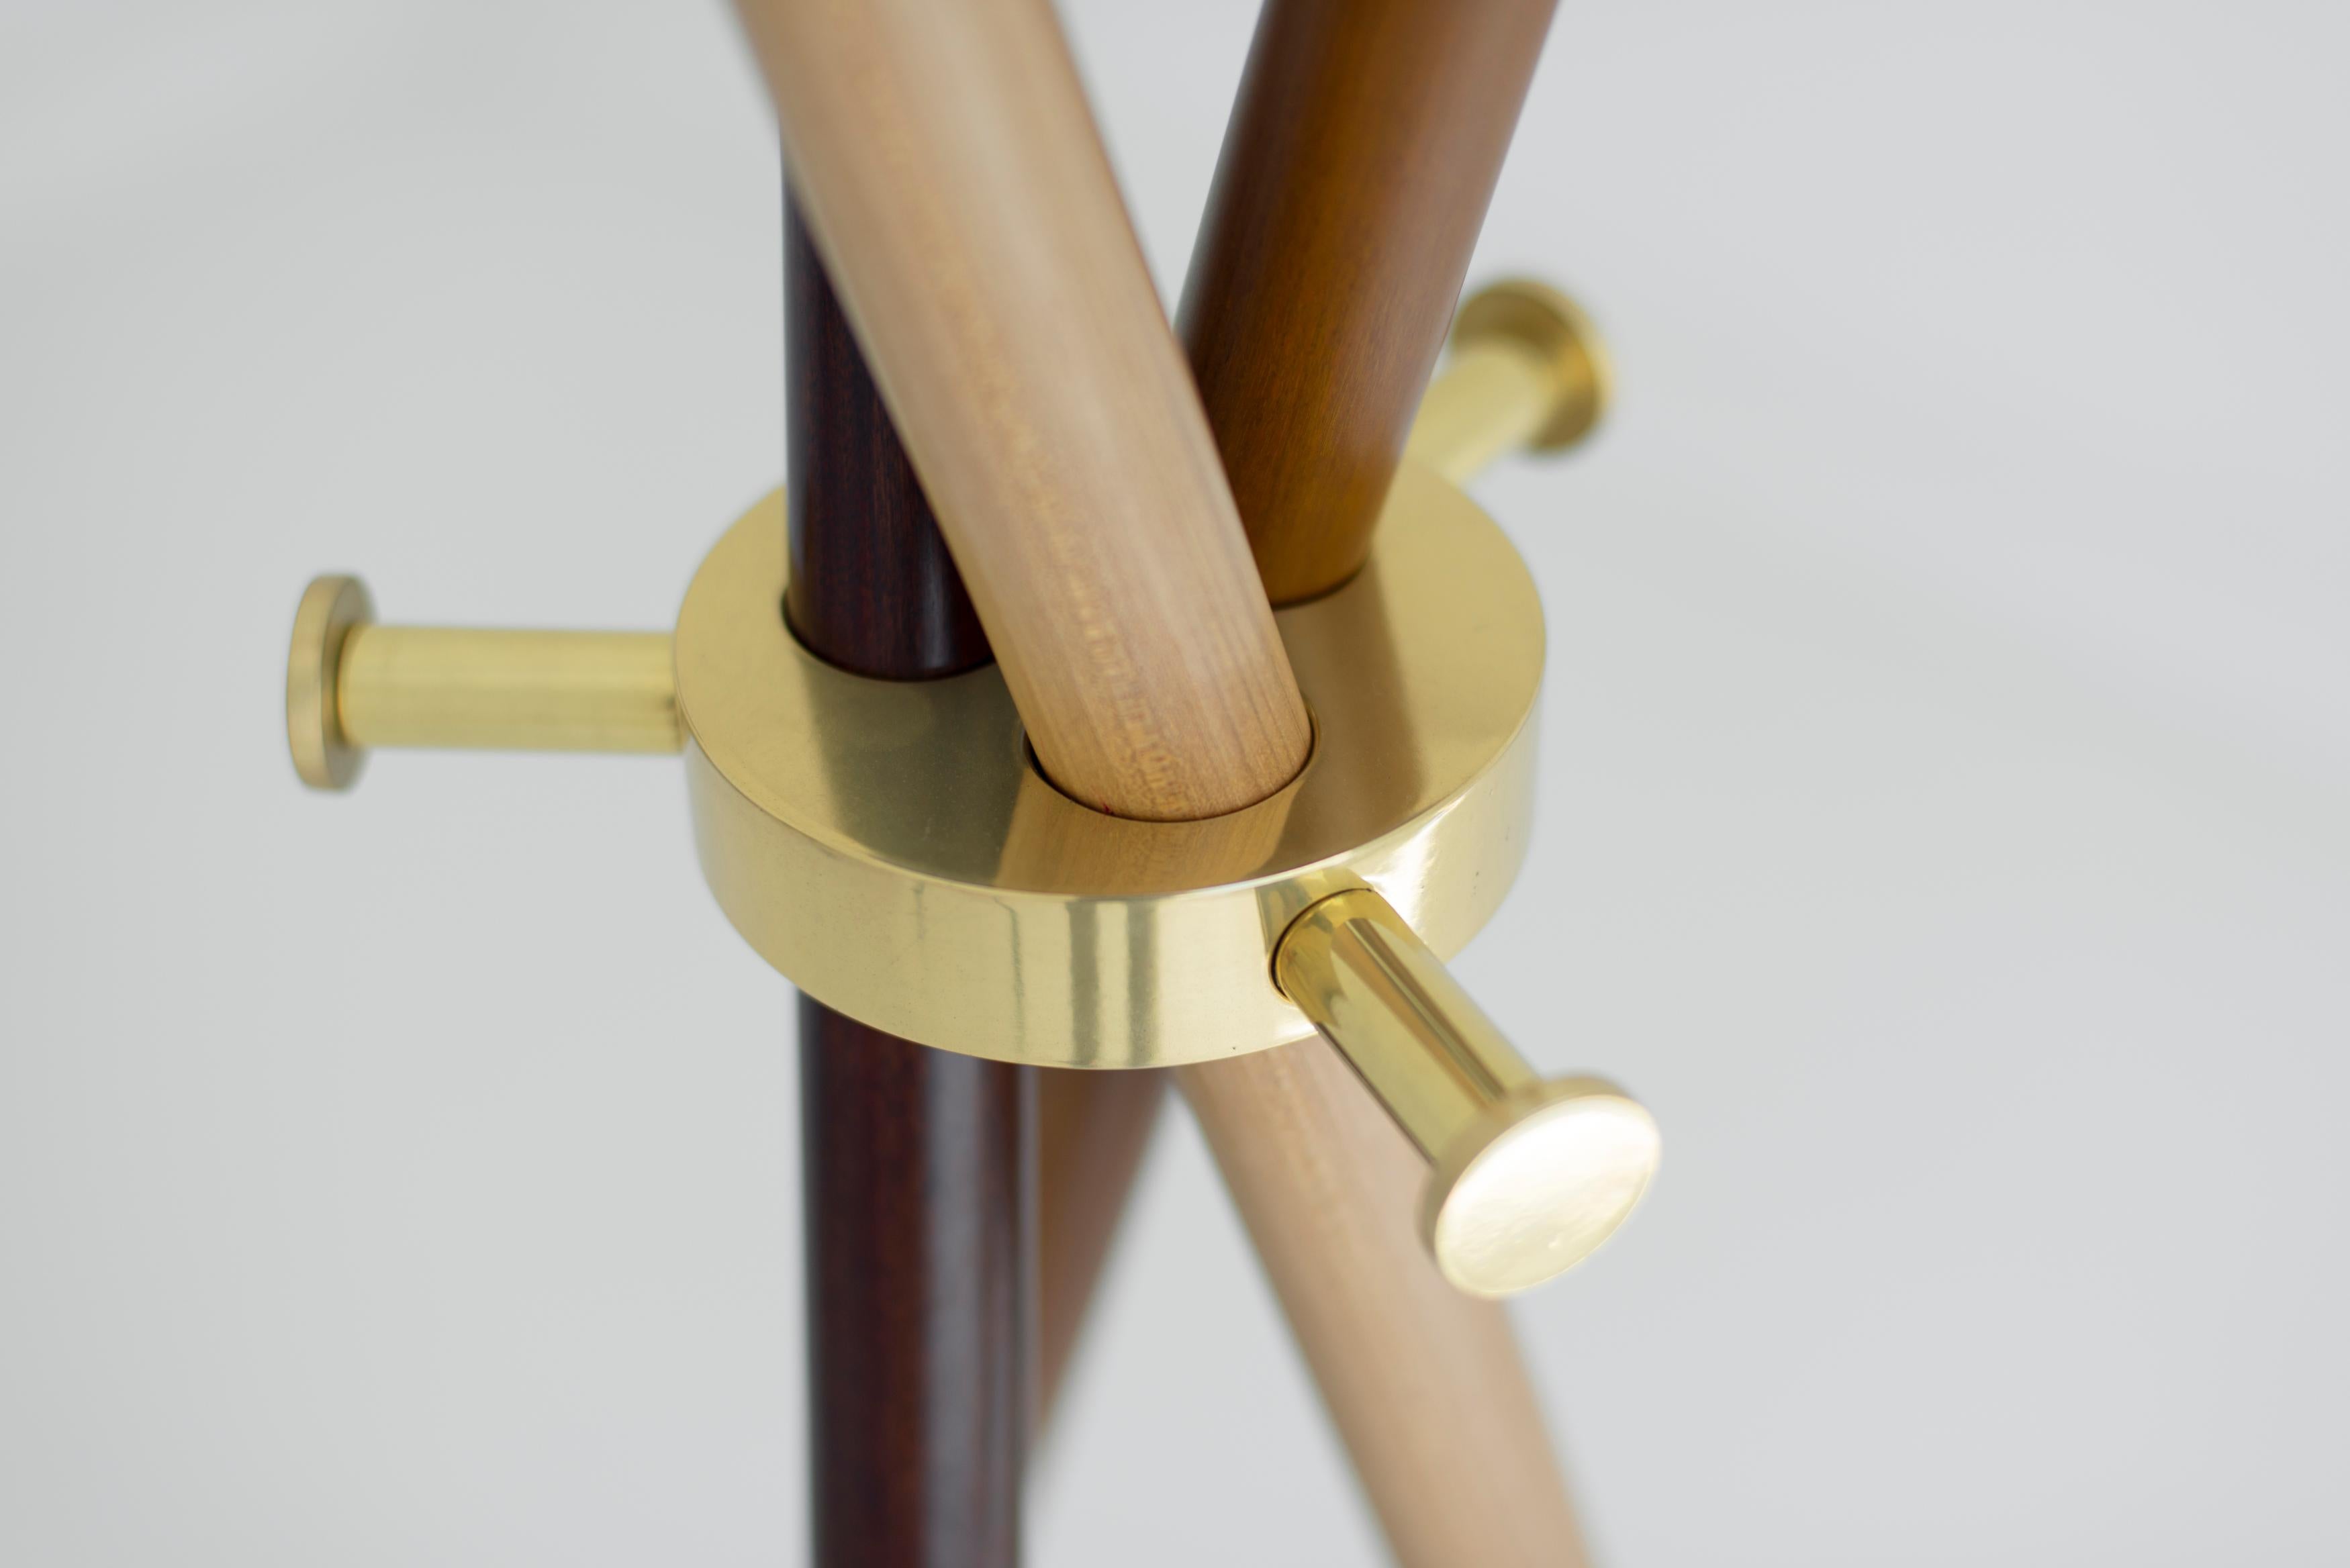 Brazilian Brass and wood Sculpted Coat Stand, Leandro Garcia, Contemporary Brazil Design